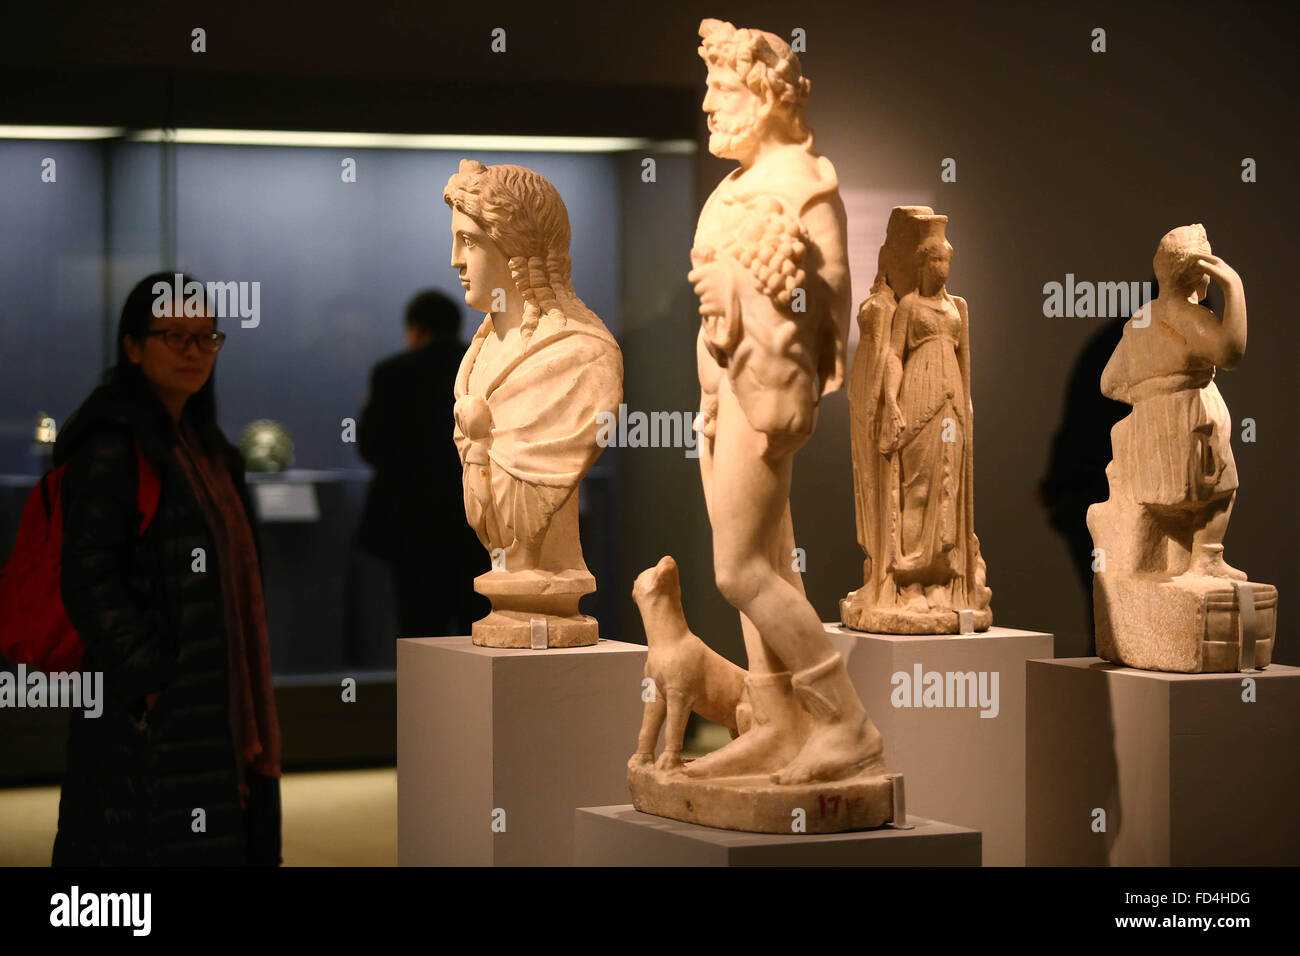 (160128) -- BEIJING, Jan. 28, 2016 (Xinhua) -- People visit the exhibition 'Treasures of Romania' at National Museum of China in Beijing, capital of China, on Jan. 28, 2016. The three-month exhibition opened here Thursday, showcasing Romania's history from the pre-historical period to the end of the 18th century with 445 pieces (sets) of exhibits. (Xinhua/Lu Xu) (yjc) Stock Photo